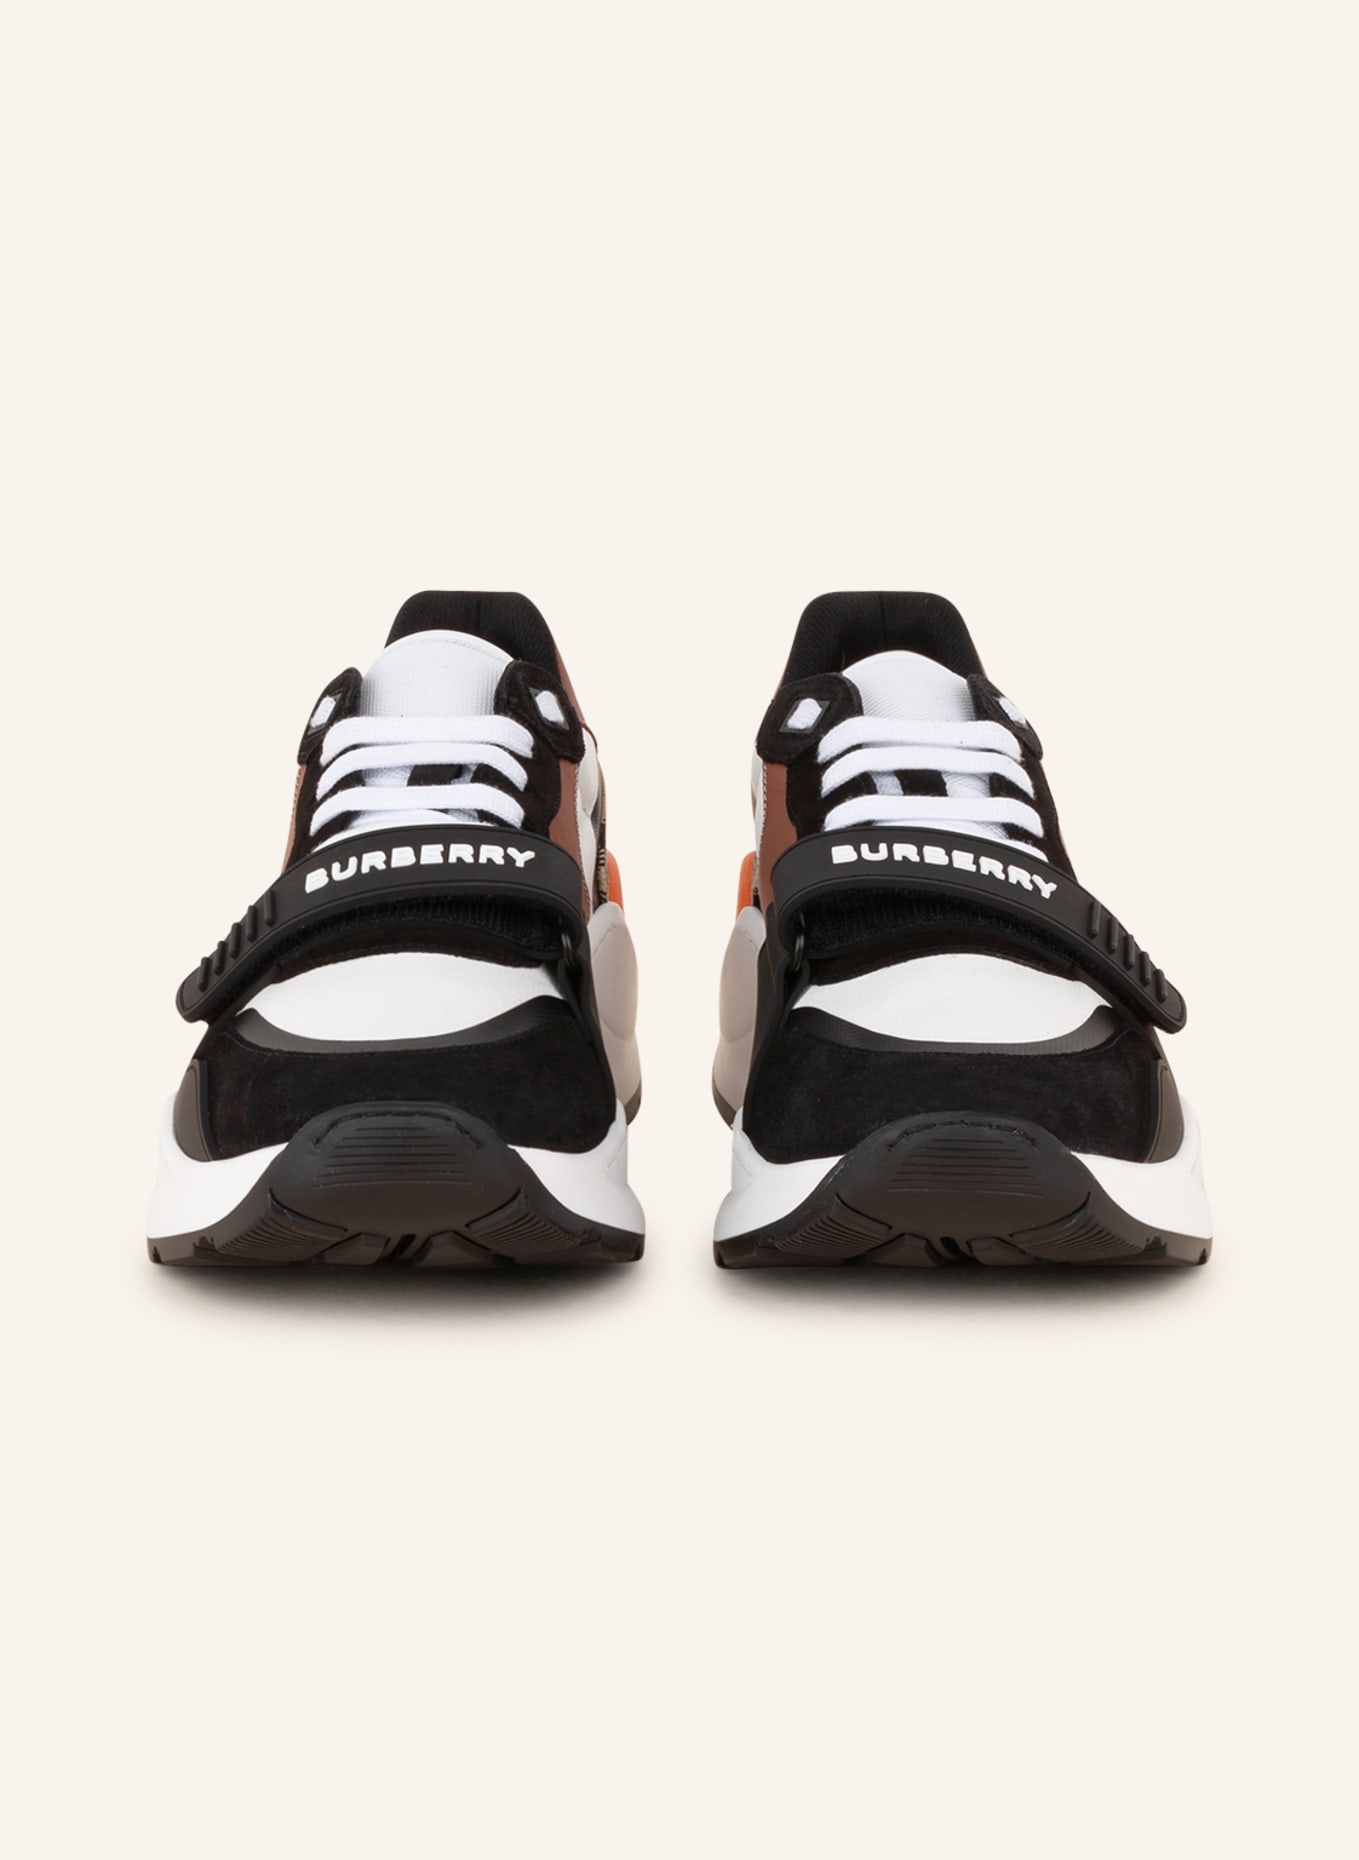 BURBERRY Sneakers RAMSEY in black/ brown/ white